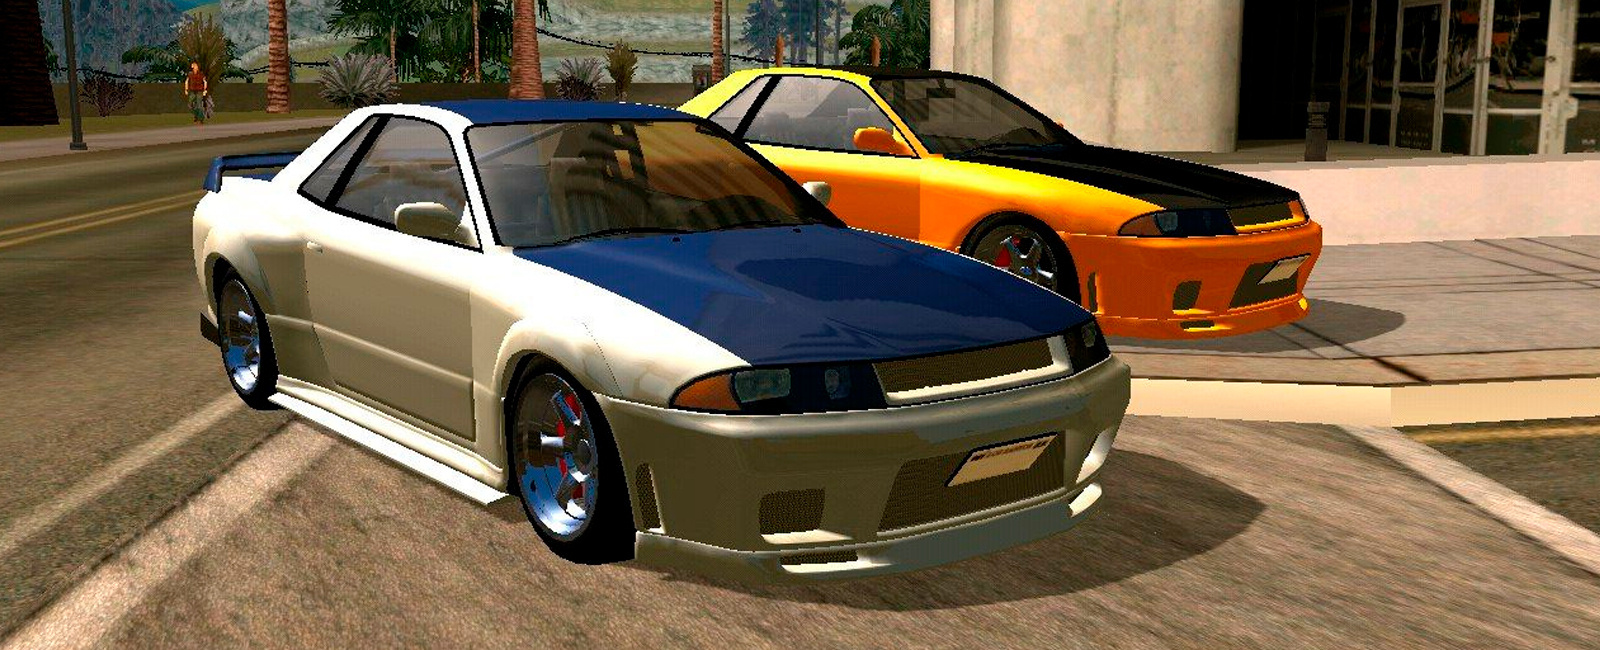 text folder file - GTA San Andreas Remastered with Realistic car pack mod  for Grand Theft Auto: San Andreas - ModDB